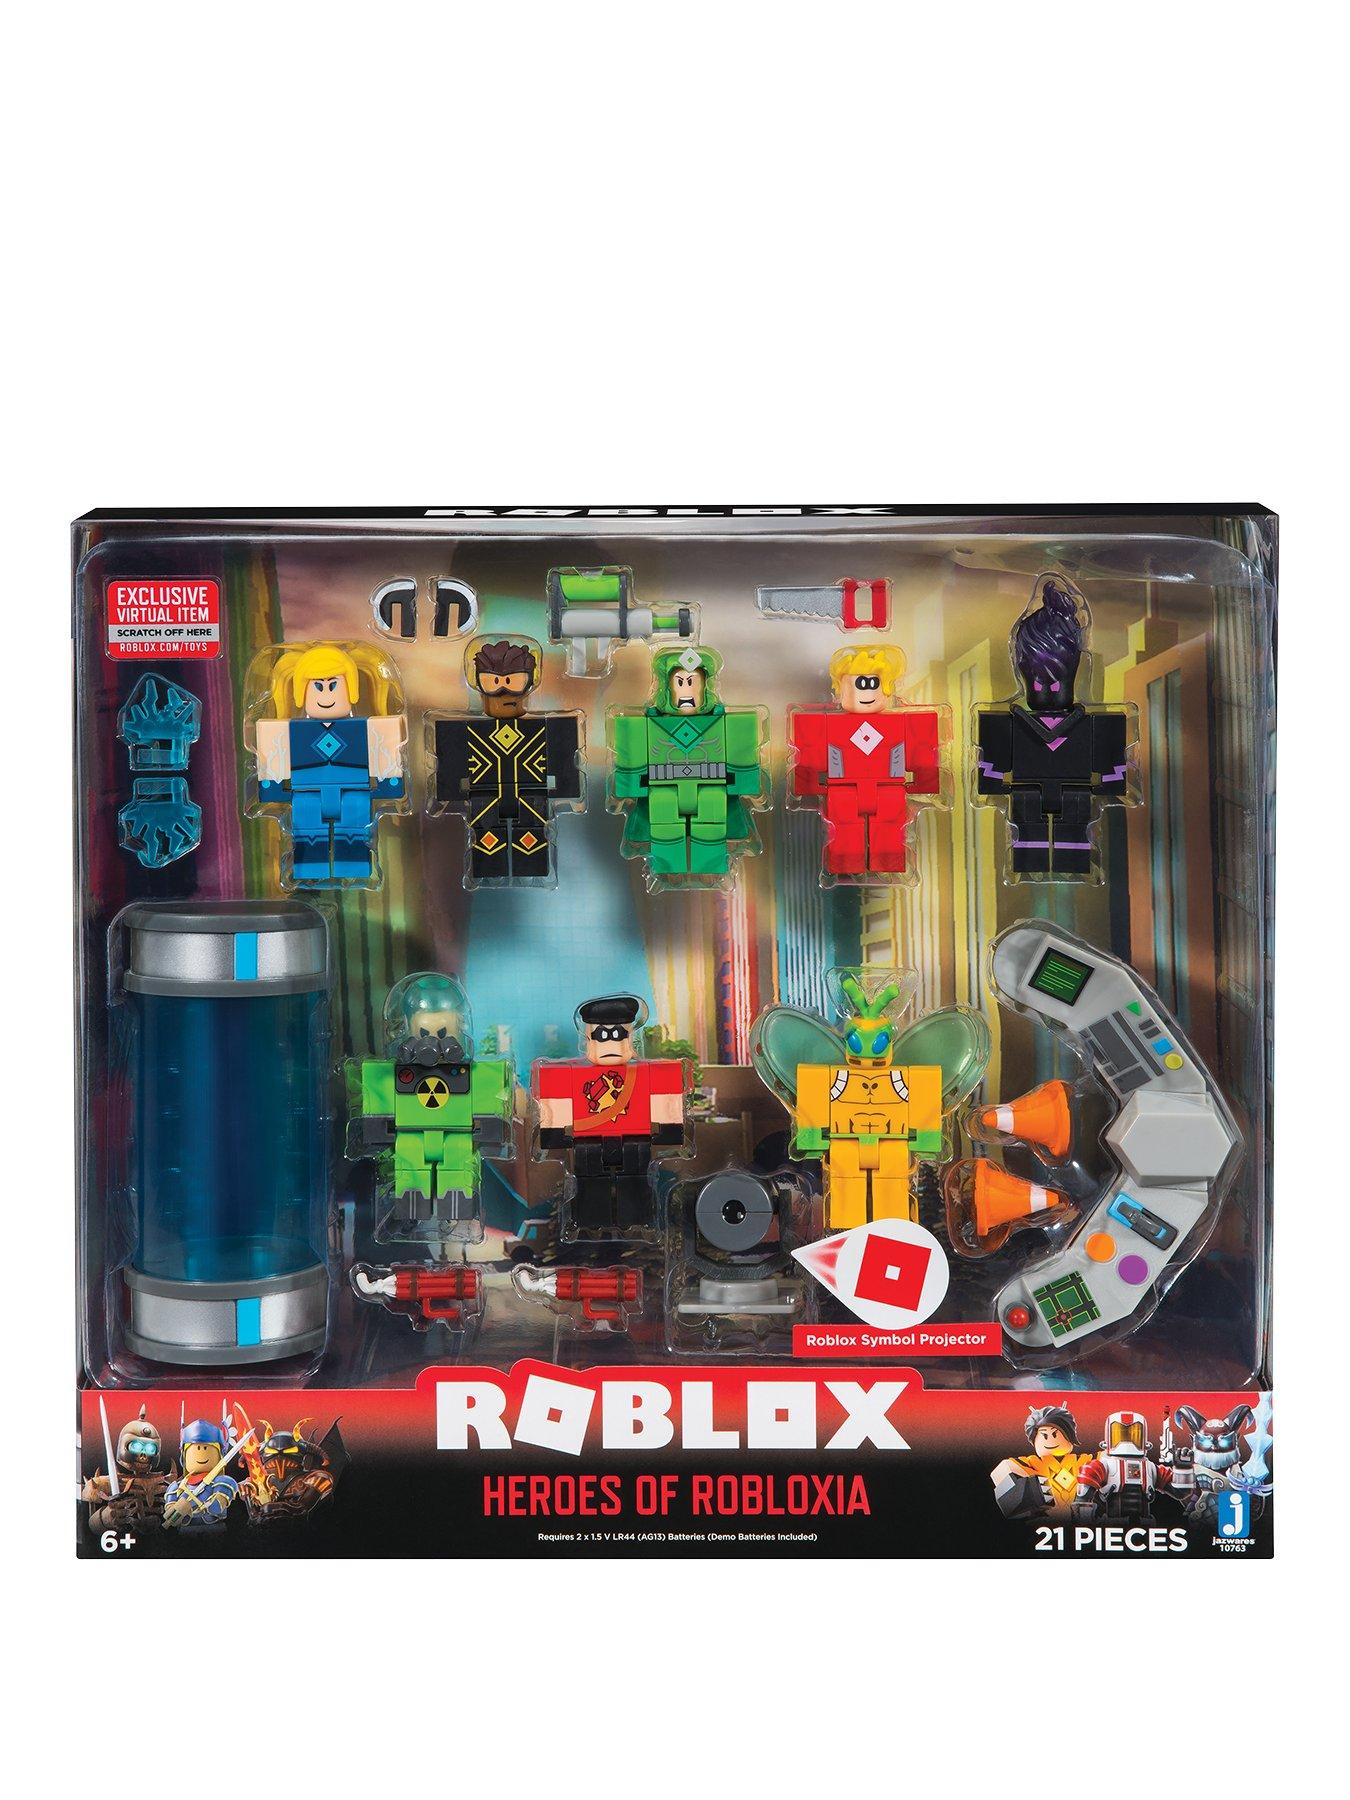 Roblox Heroes Of Robloxia Playset Littlewoodsireland Ie - roblox heroes of robloxia how to get the secret badge spiderman event